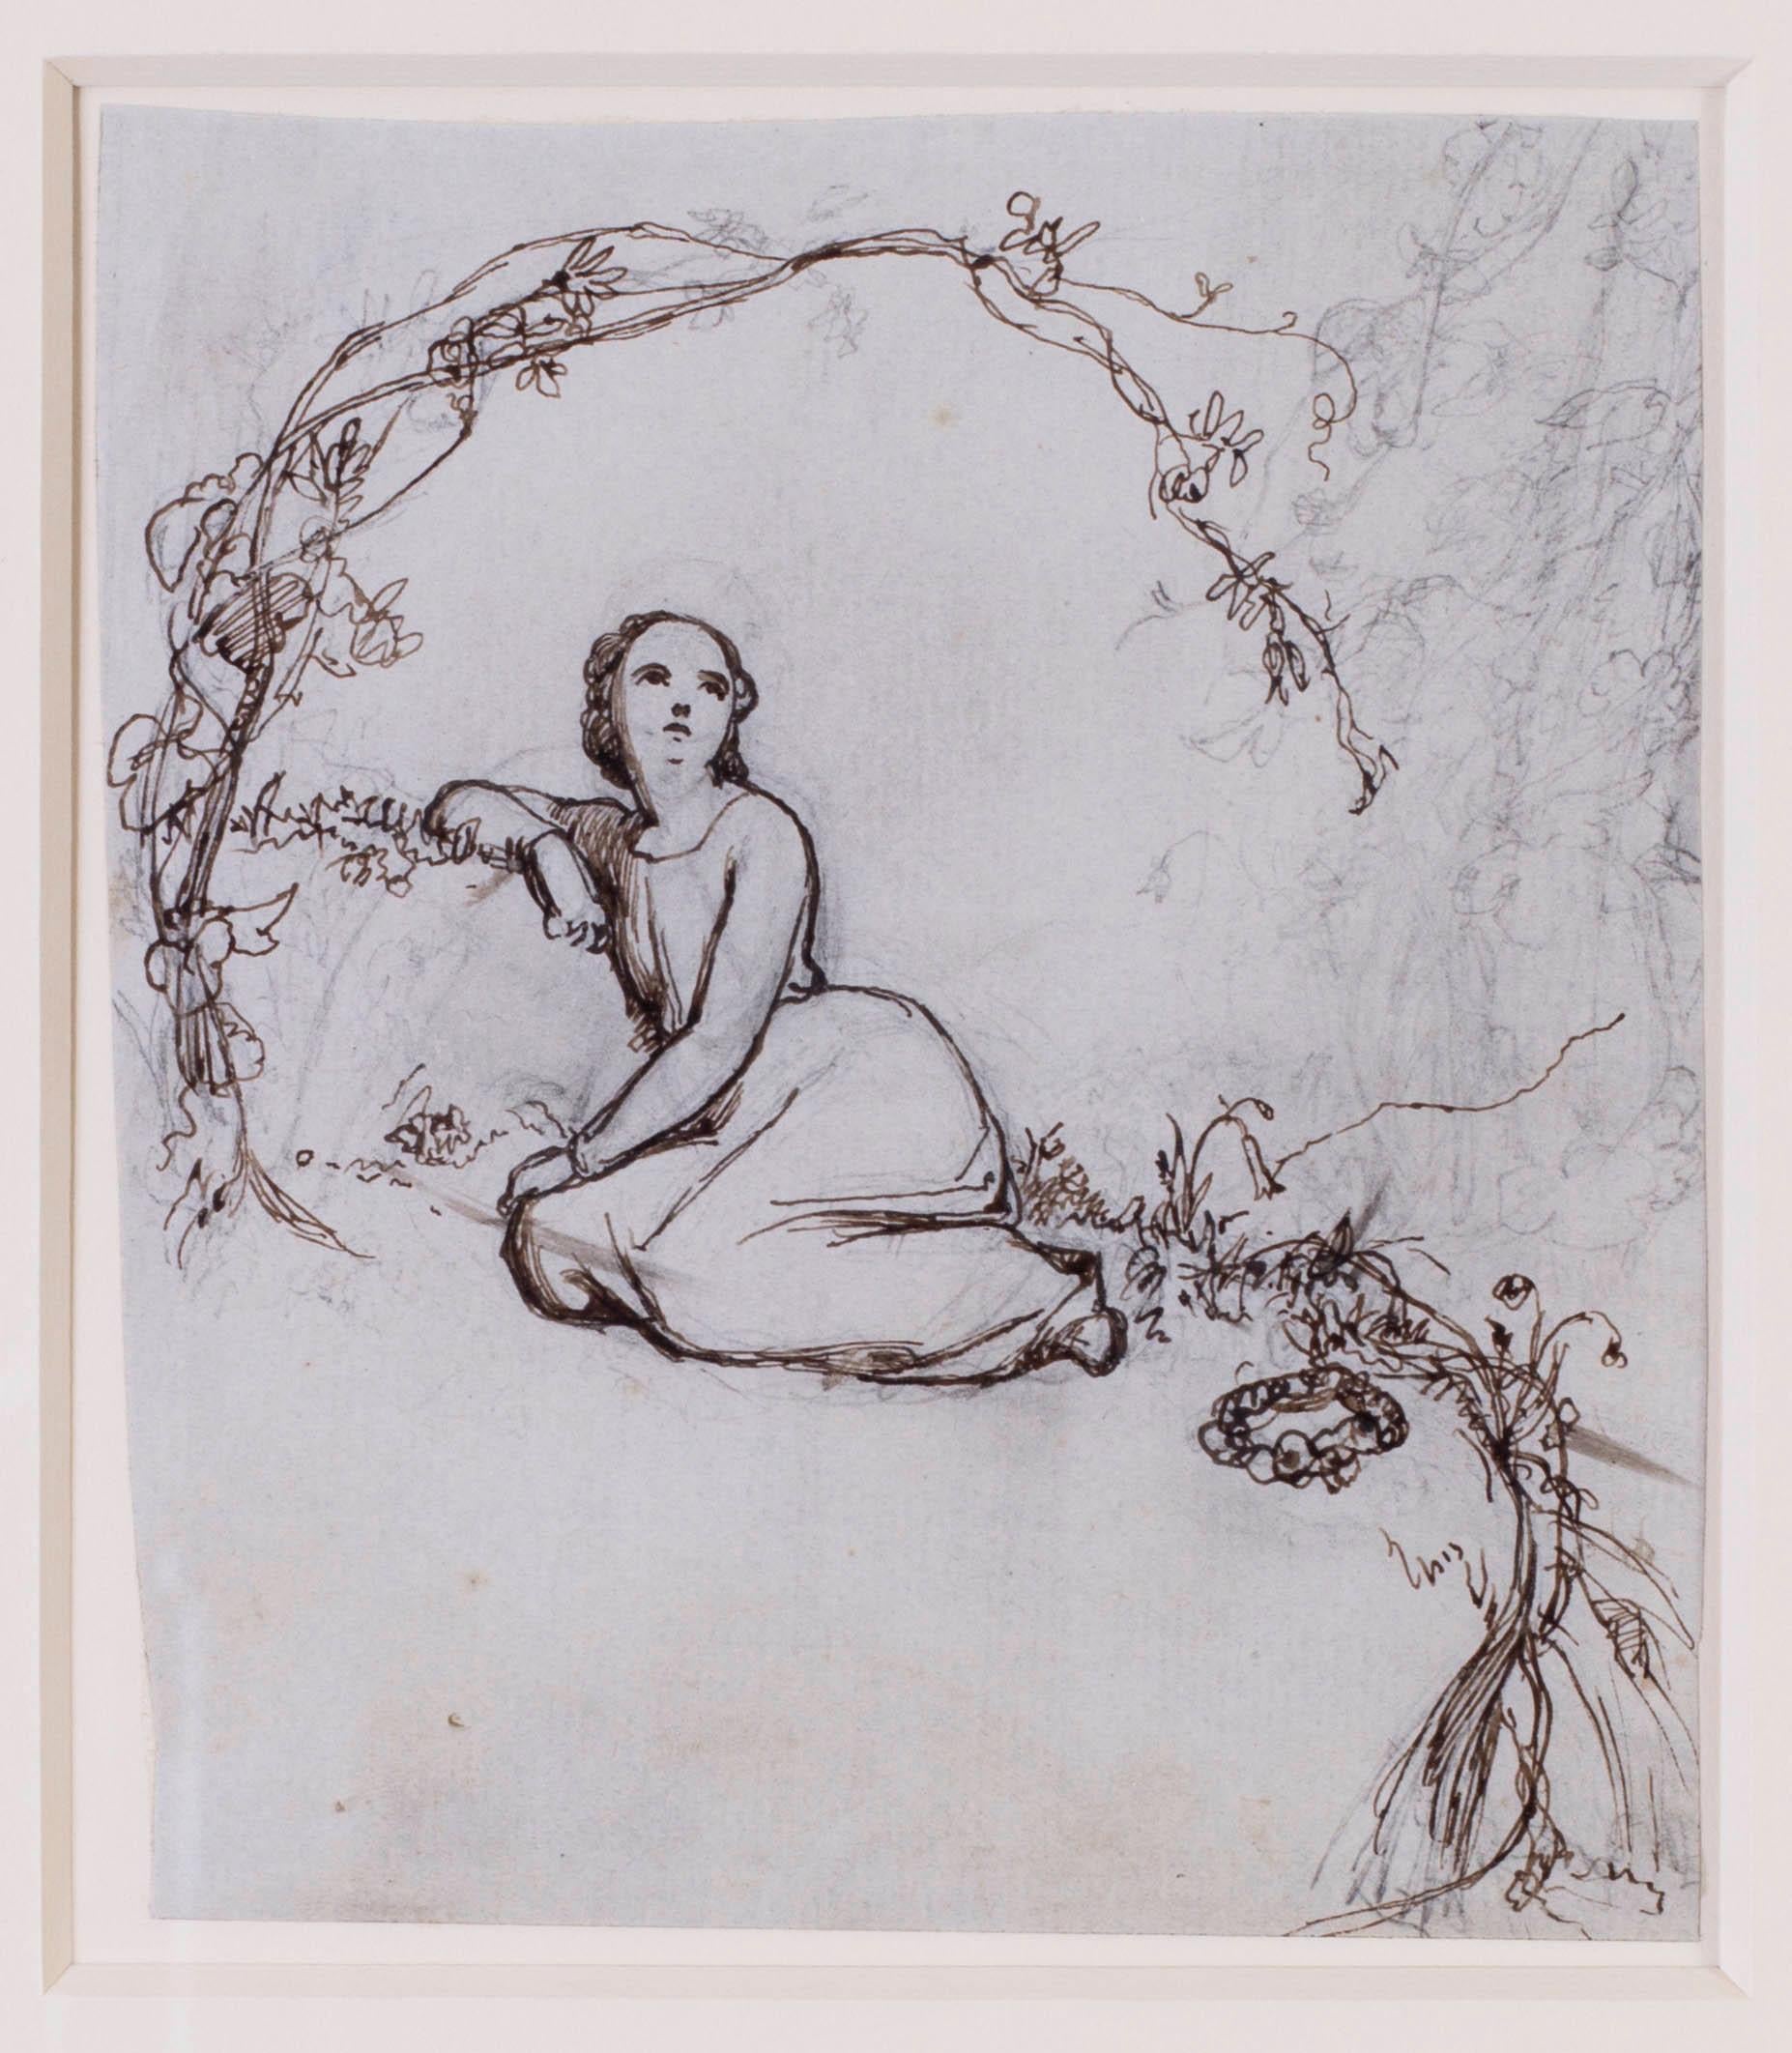 British, 19th Century drawing of a maiden by Pickersgill - Gray Figurative Art by Frederick Richard Pickersgill